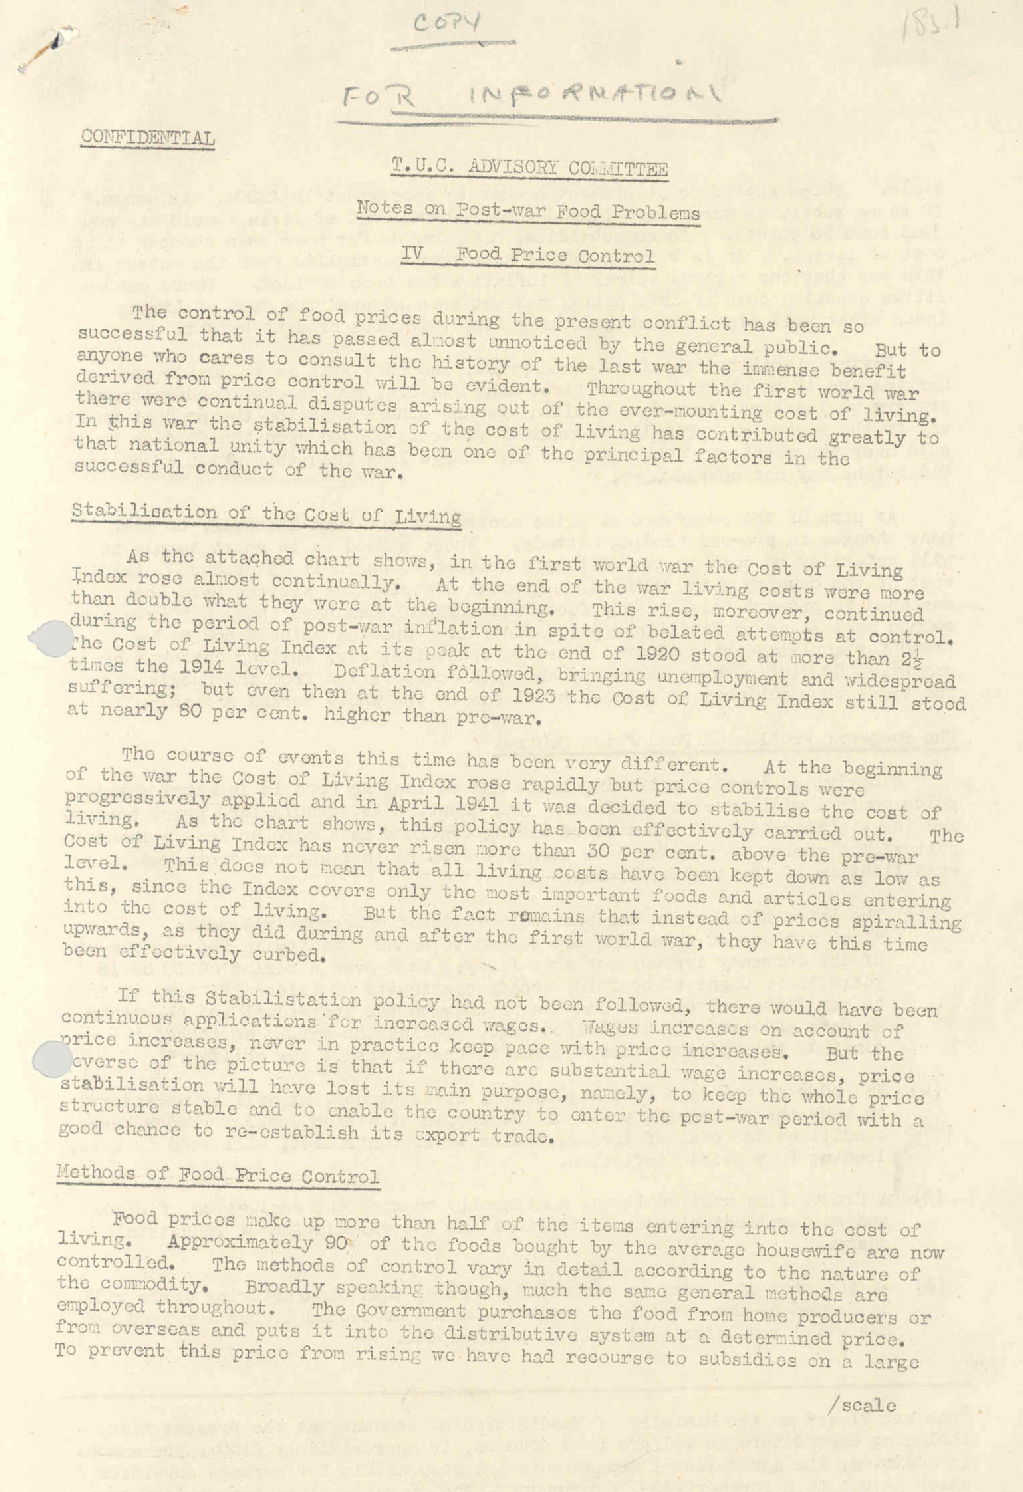 'Notes on Post-War Food Problems': 'IV. Food Price Control', 21 January 1944